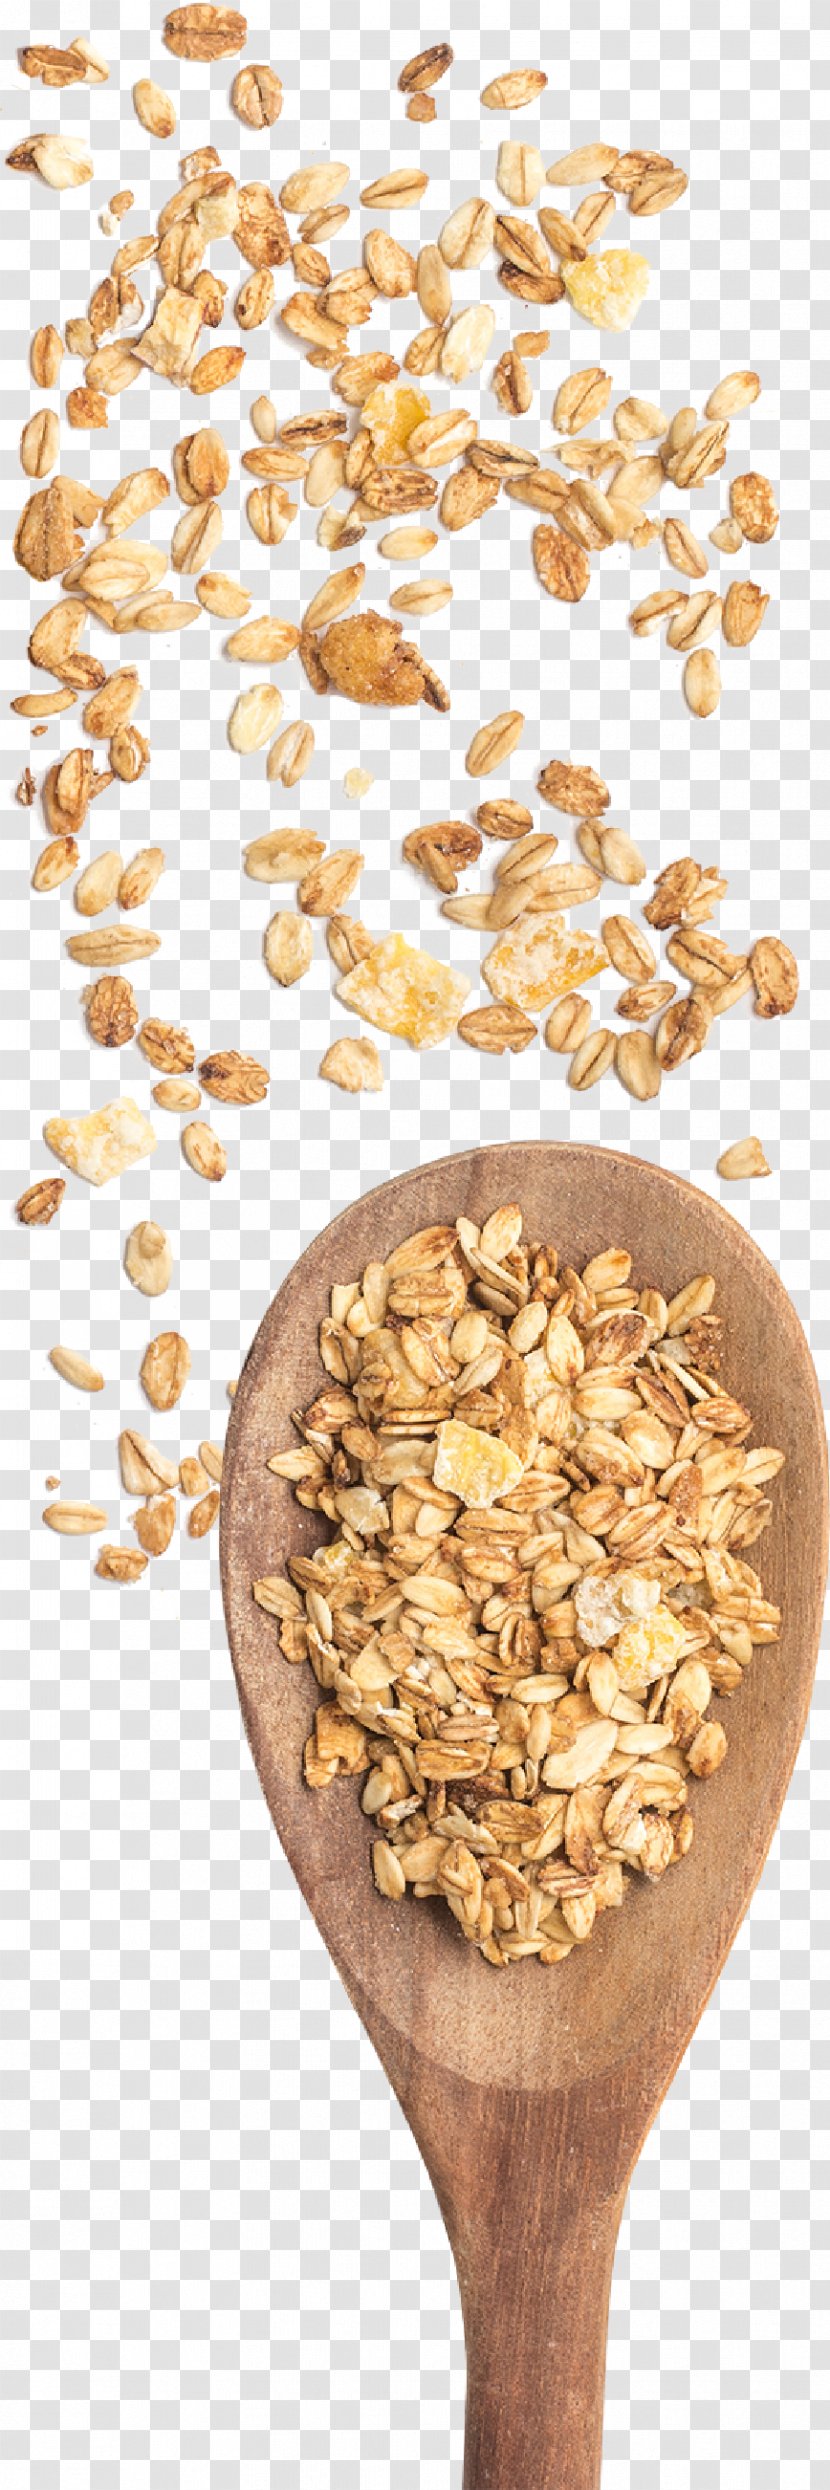 Breakfast Cereal Germ Whole Grain Oat Transparent PNG